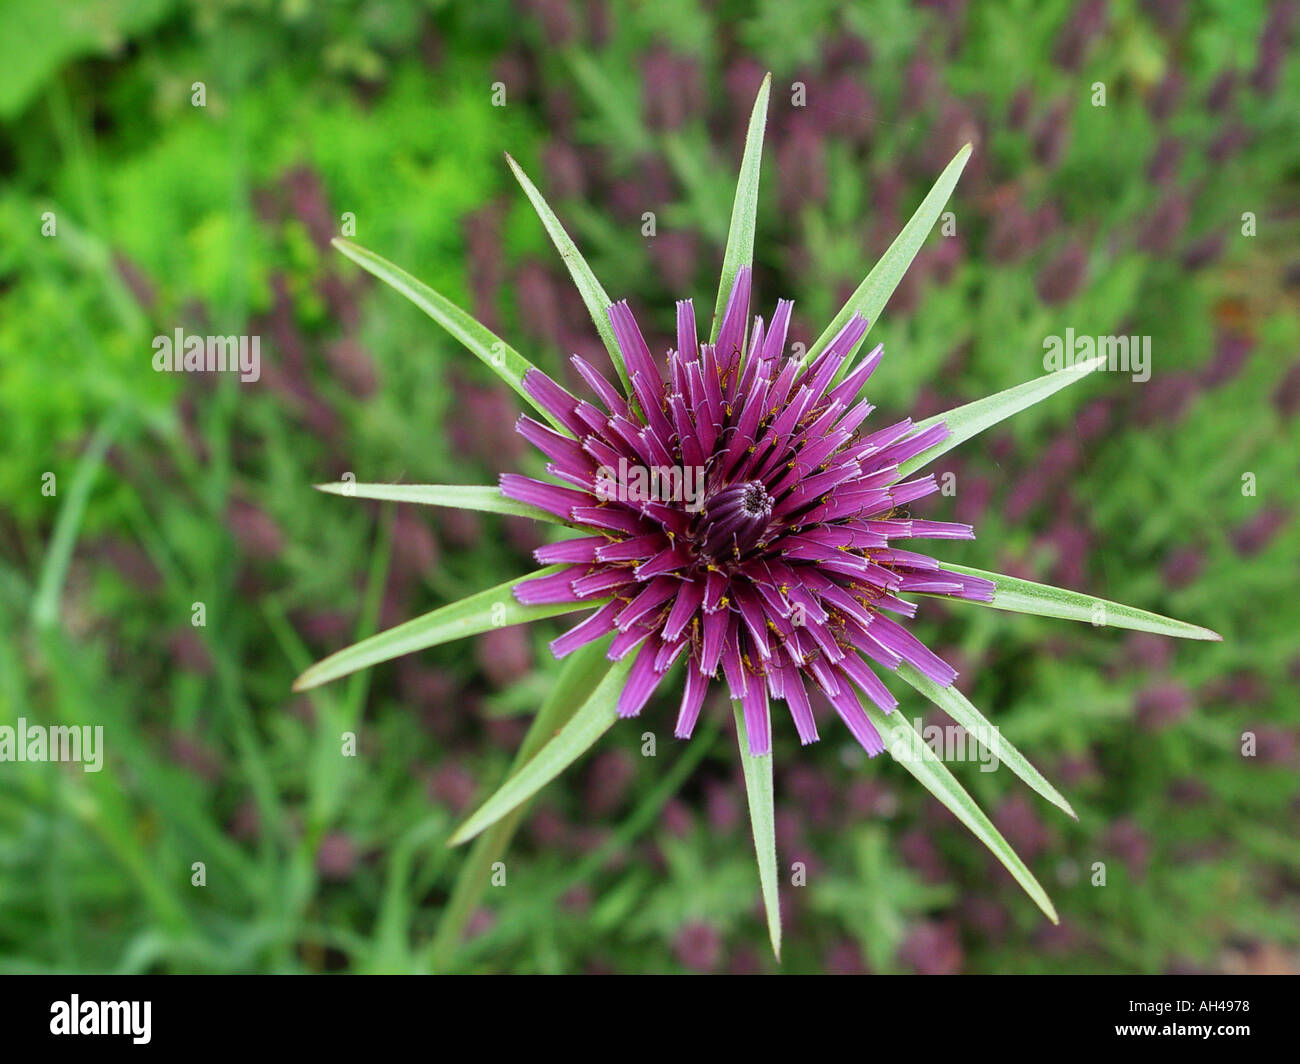 asteraceae compositae typical flower showing characteristics of this botanical family group Stock Photo